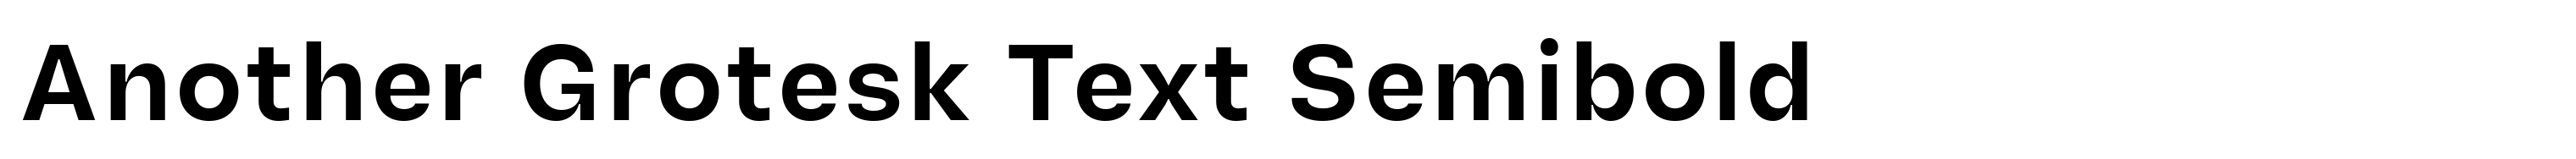 Another Grotesk Text Semibold